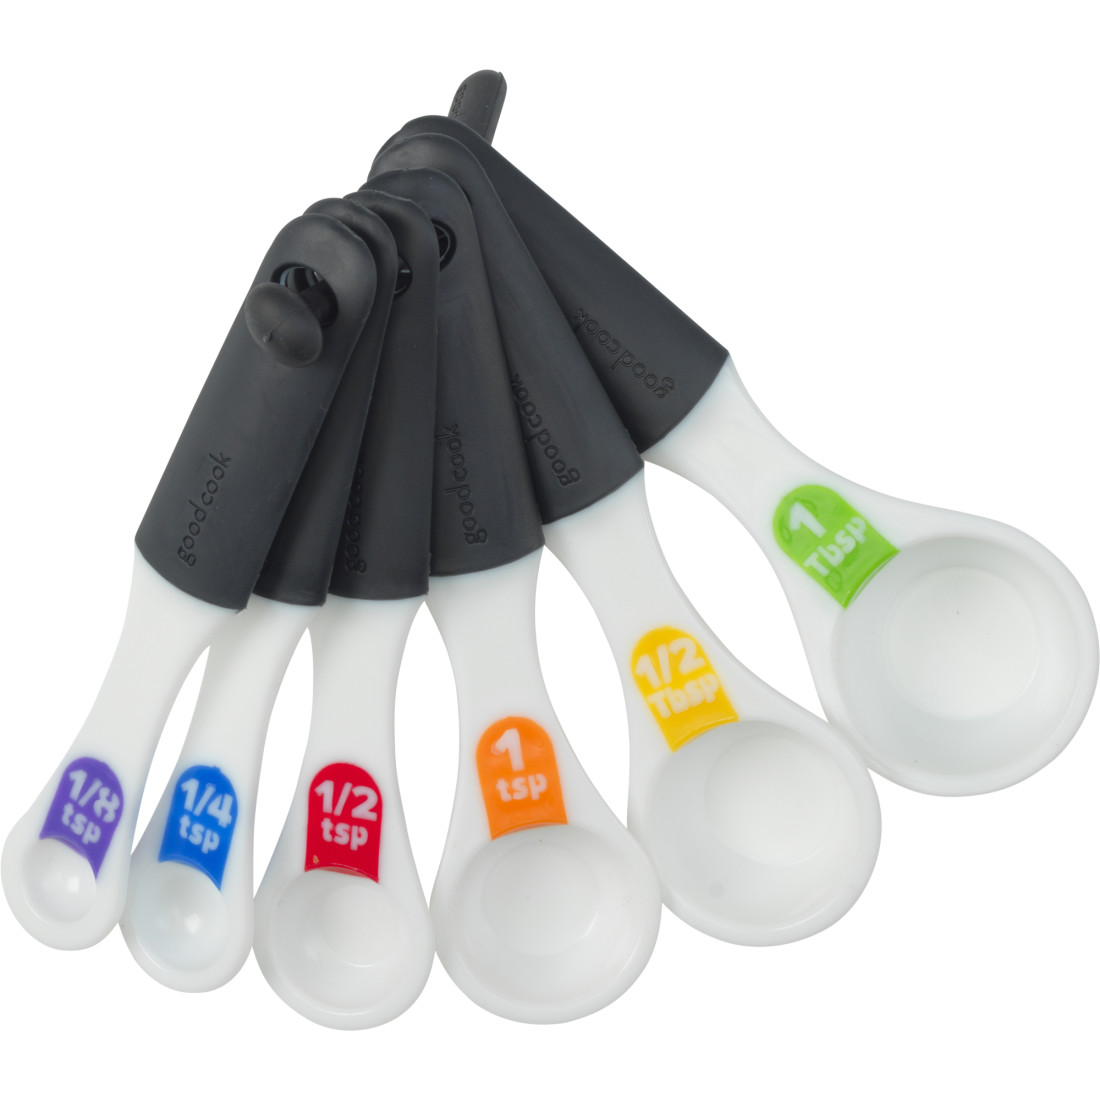 3 Piece, Just A Pinch Measuring Spoon Set